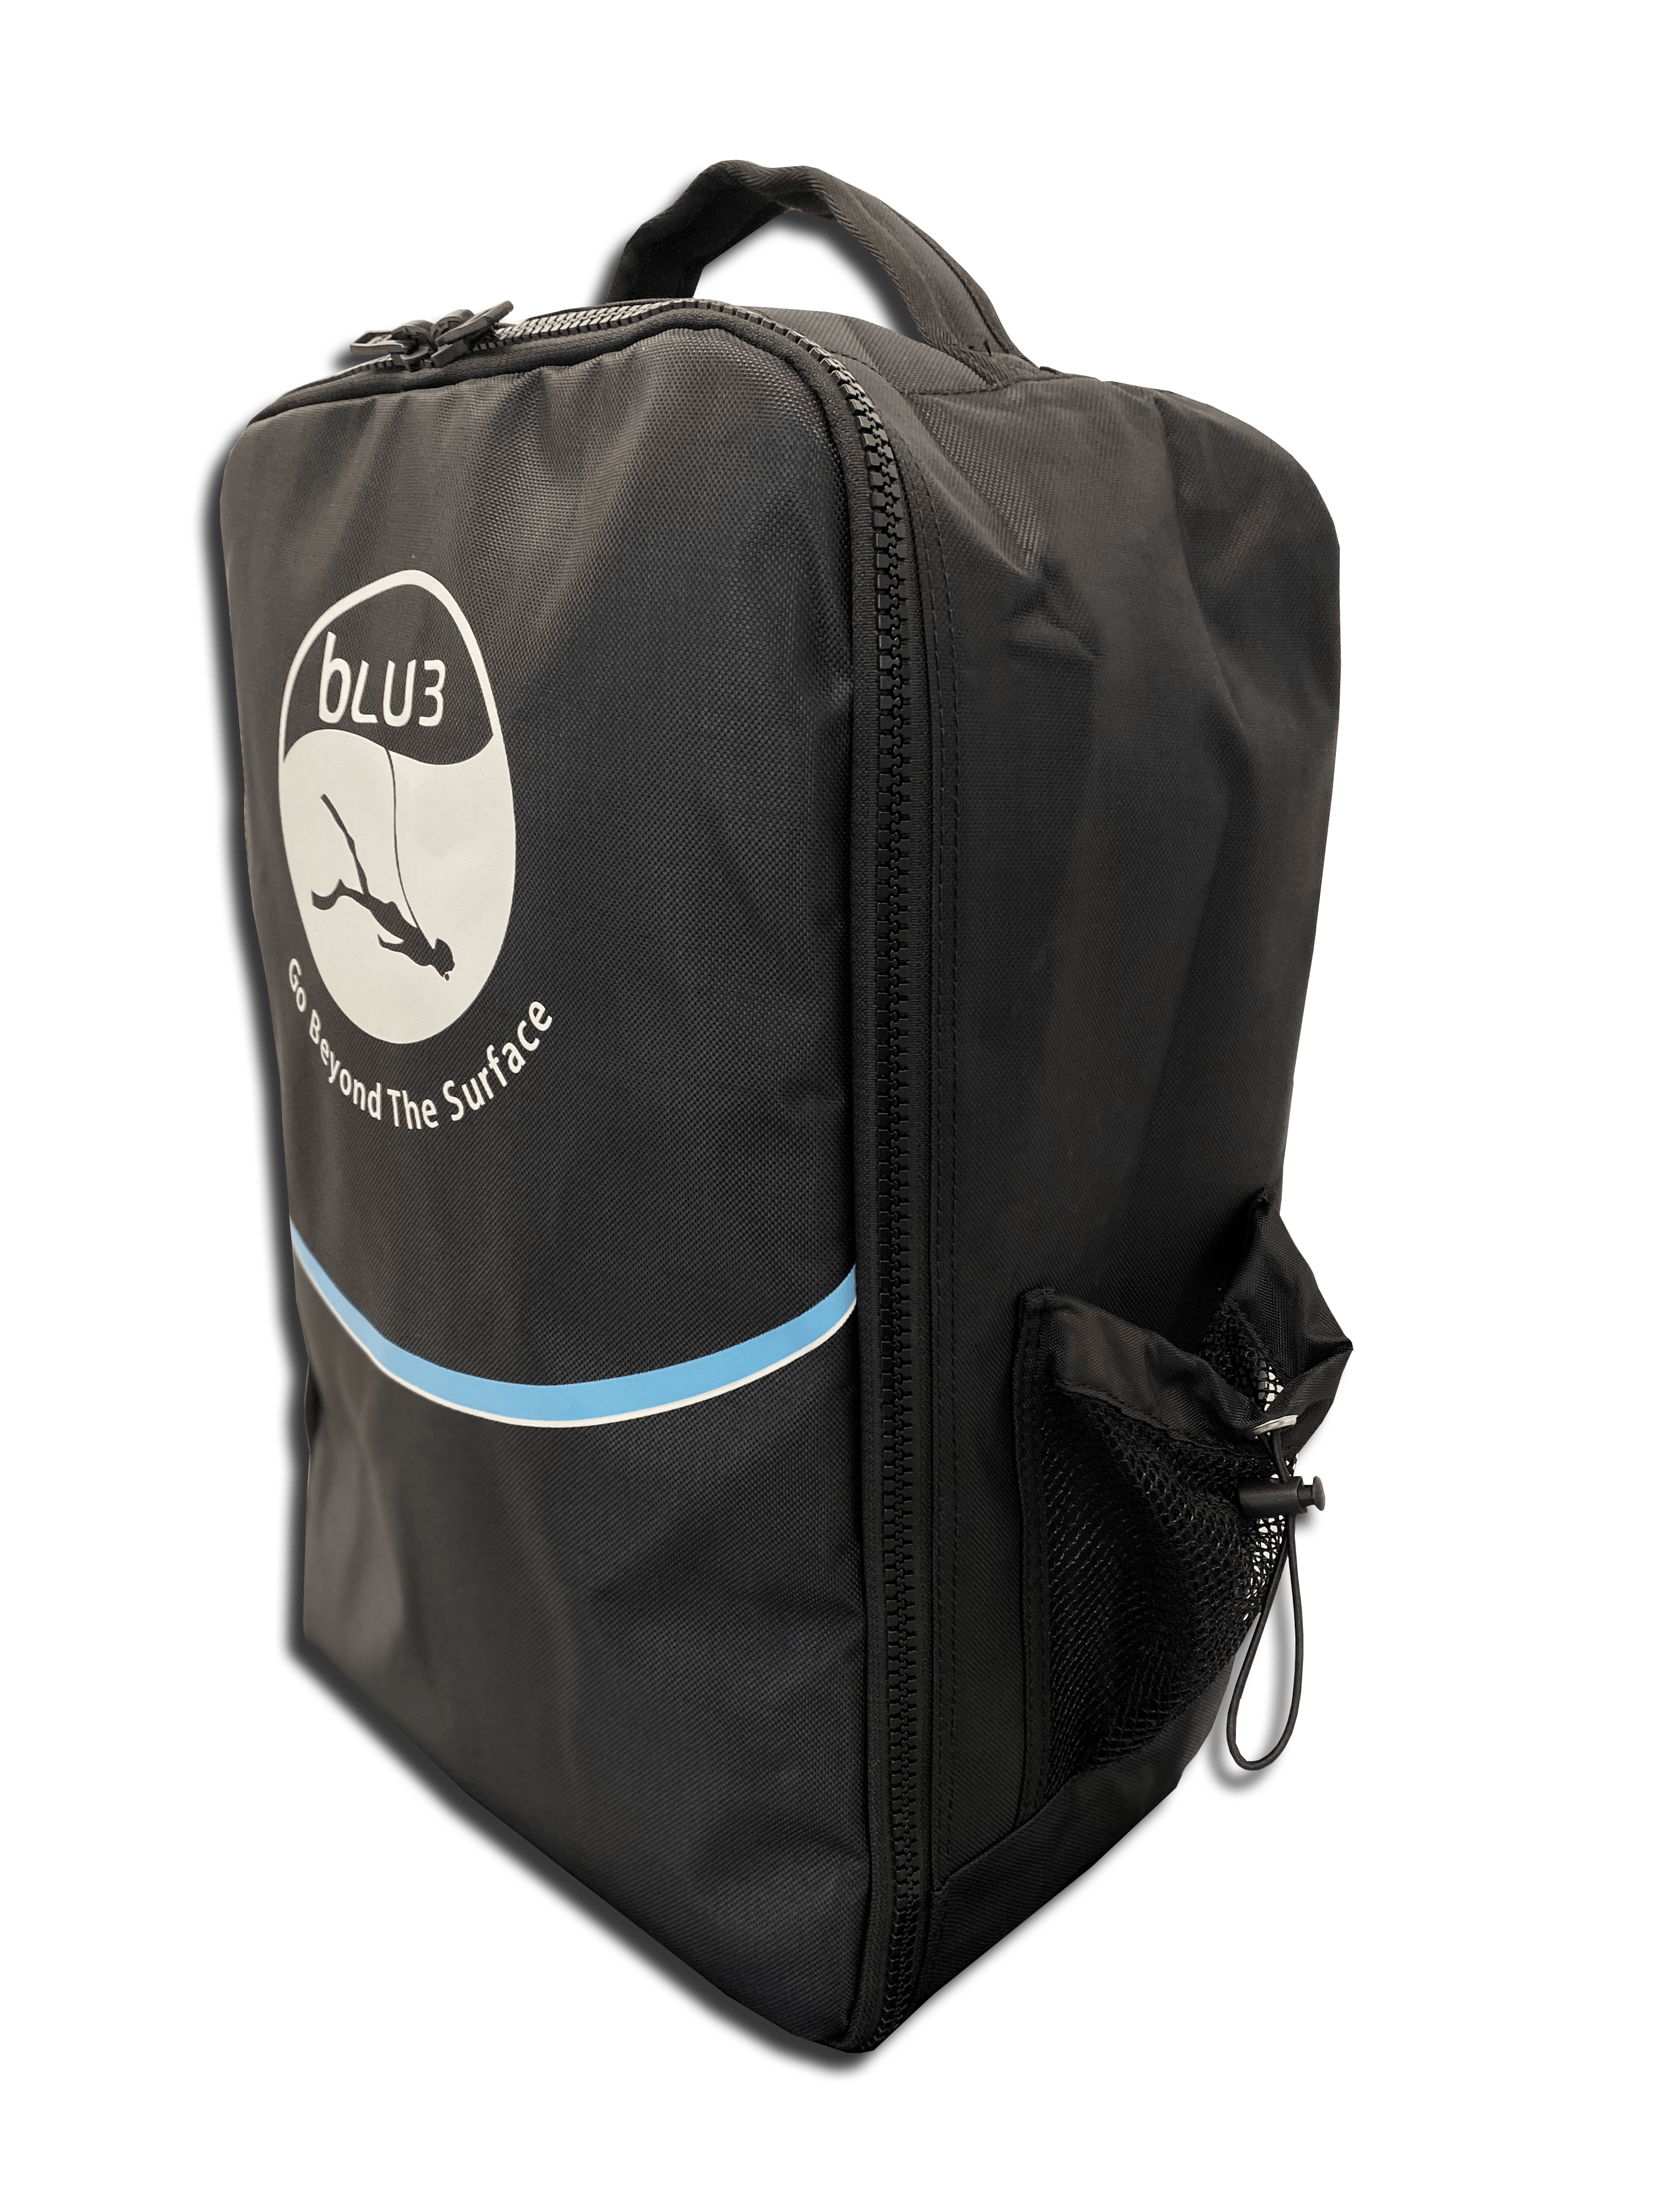 BLU3 Nemo Portable Dive System - One Battery (with backpack)